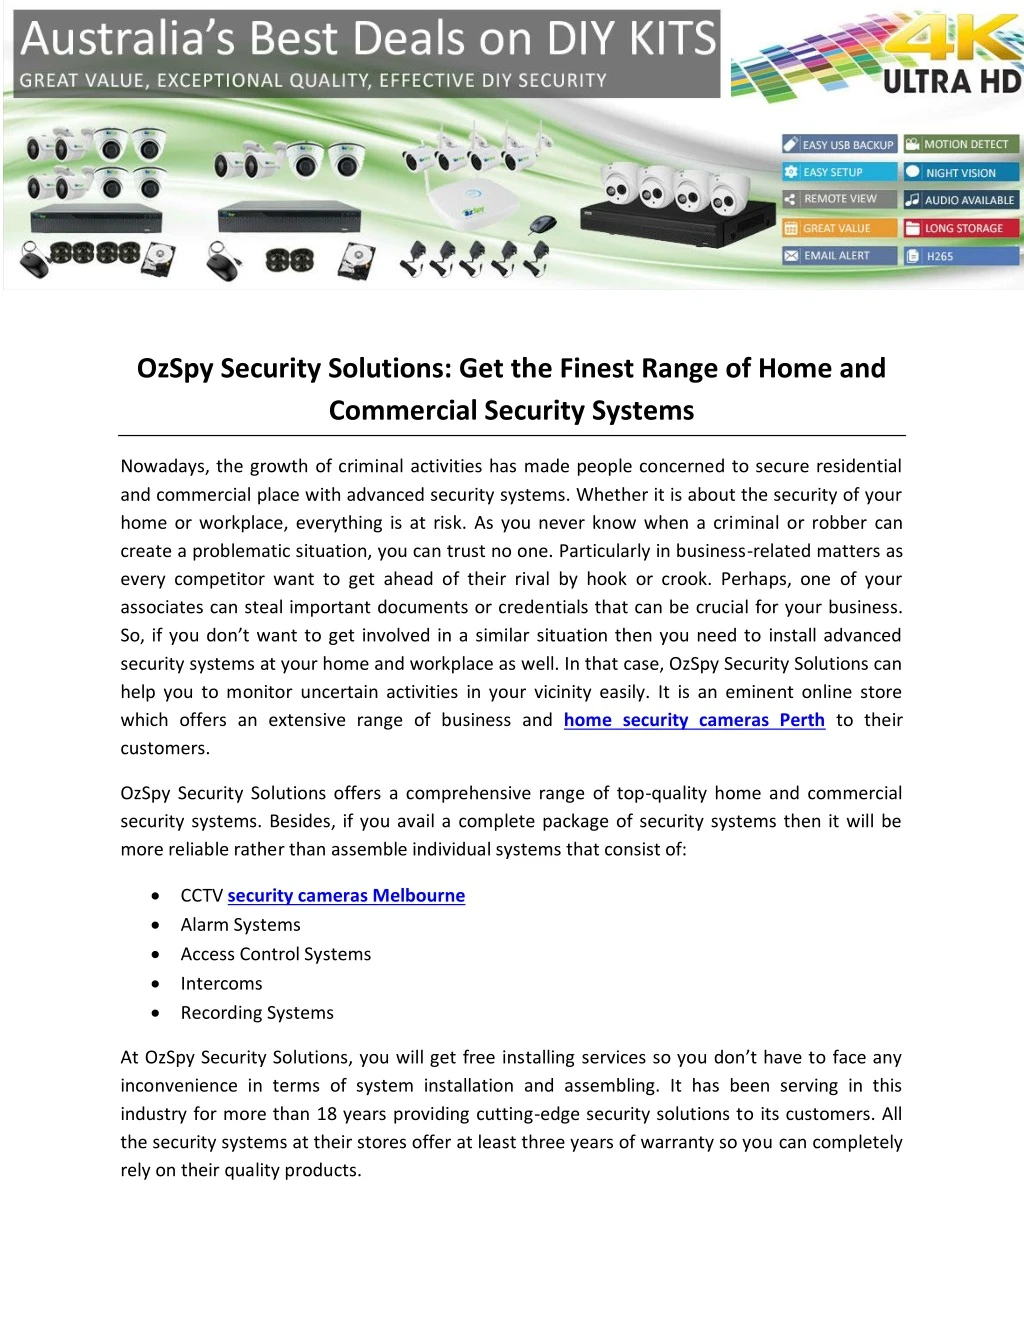 ozspy security solutions get the finest range